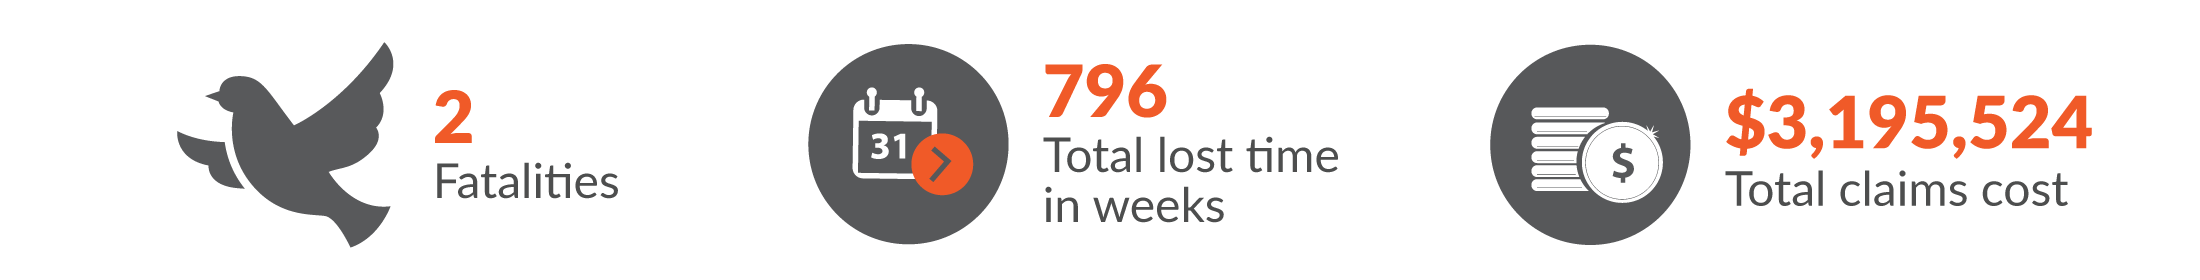 This infographic shows there were two work-related fatalities in Agriculture, forestry and fishing and the total workers compensation claims resulted in 796 total lost time in weeks and $3,195,524 was paid in benefits.